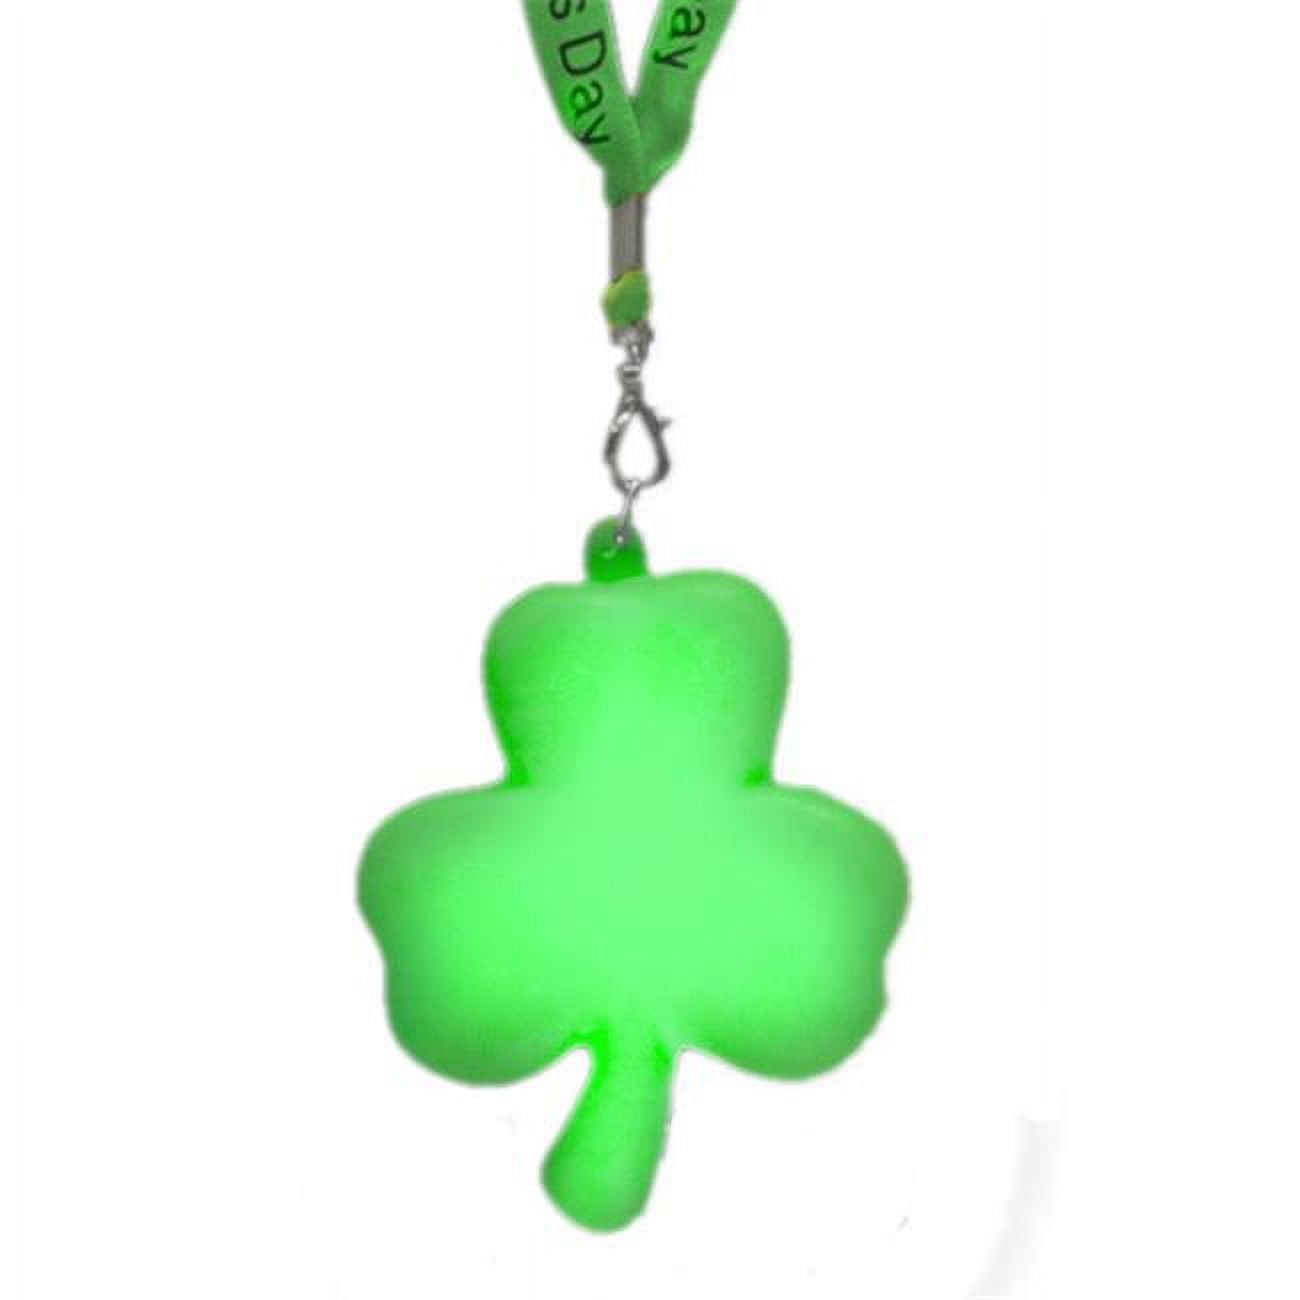 Picture of Blinkee 1002000 Shamrock Charm Necklace with Green Lightup Lanyard